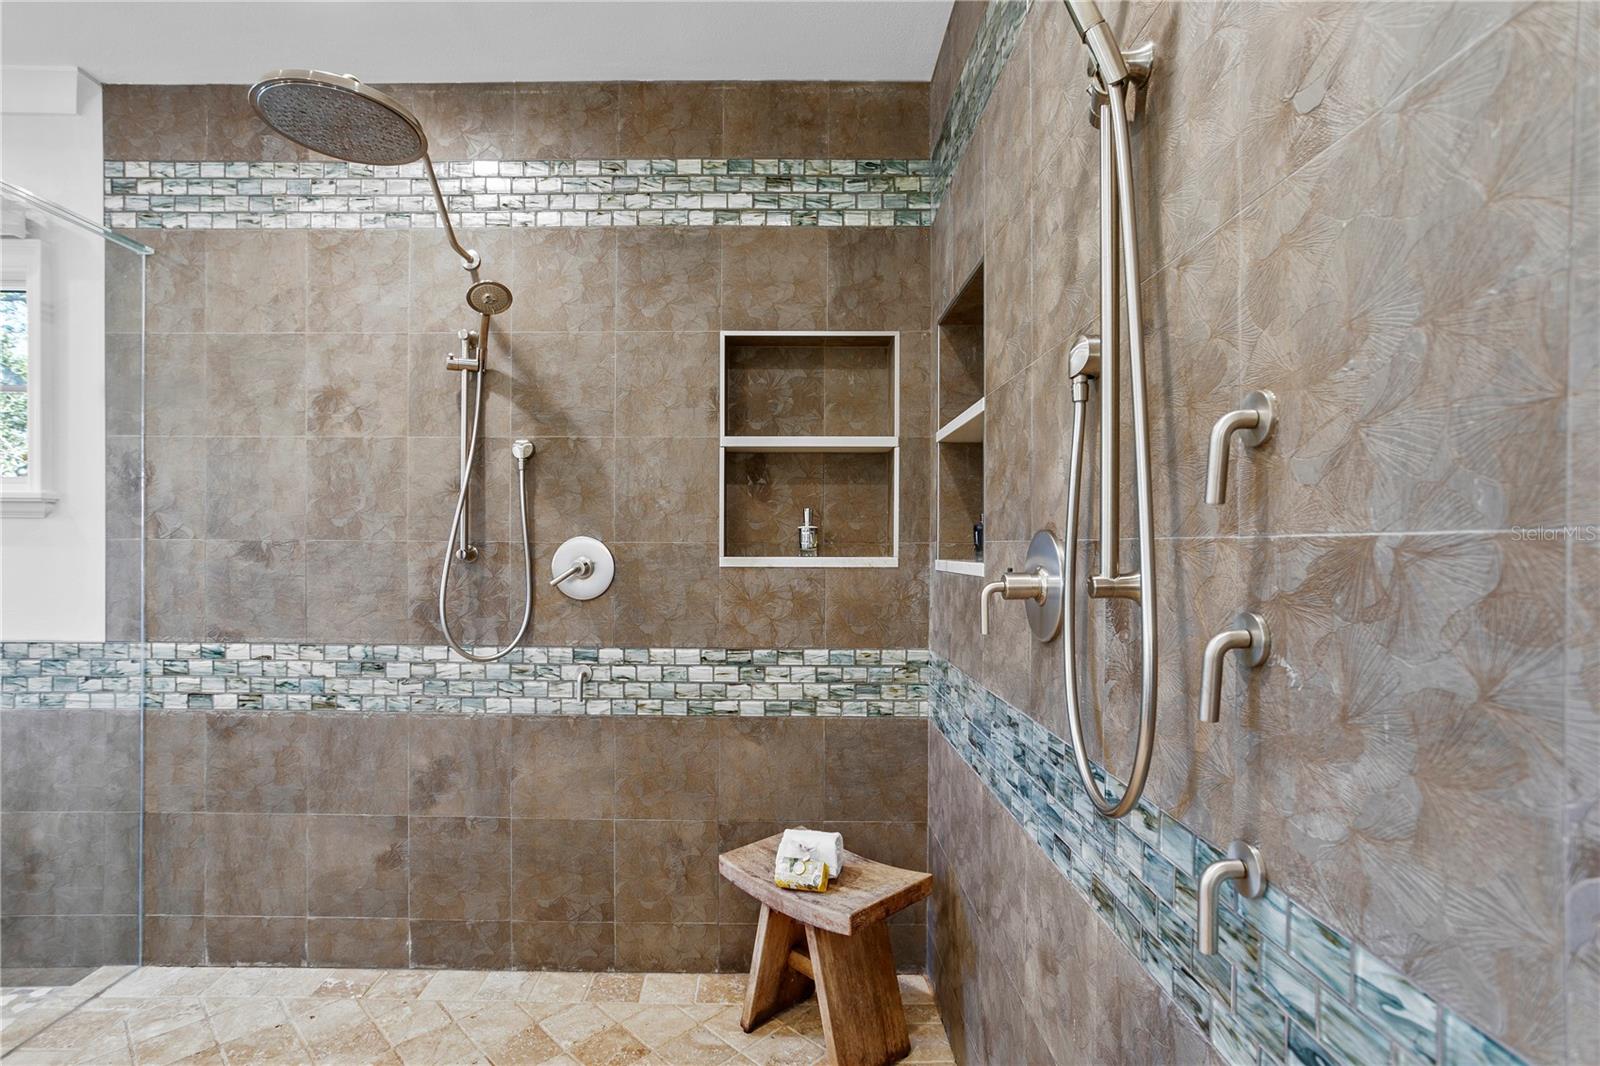 The updated primary bathroom has a large shower with 2 shower heads and 2 sprayers.